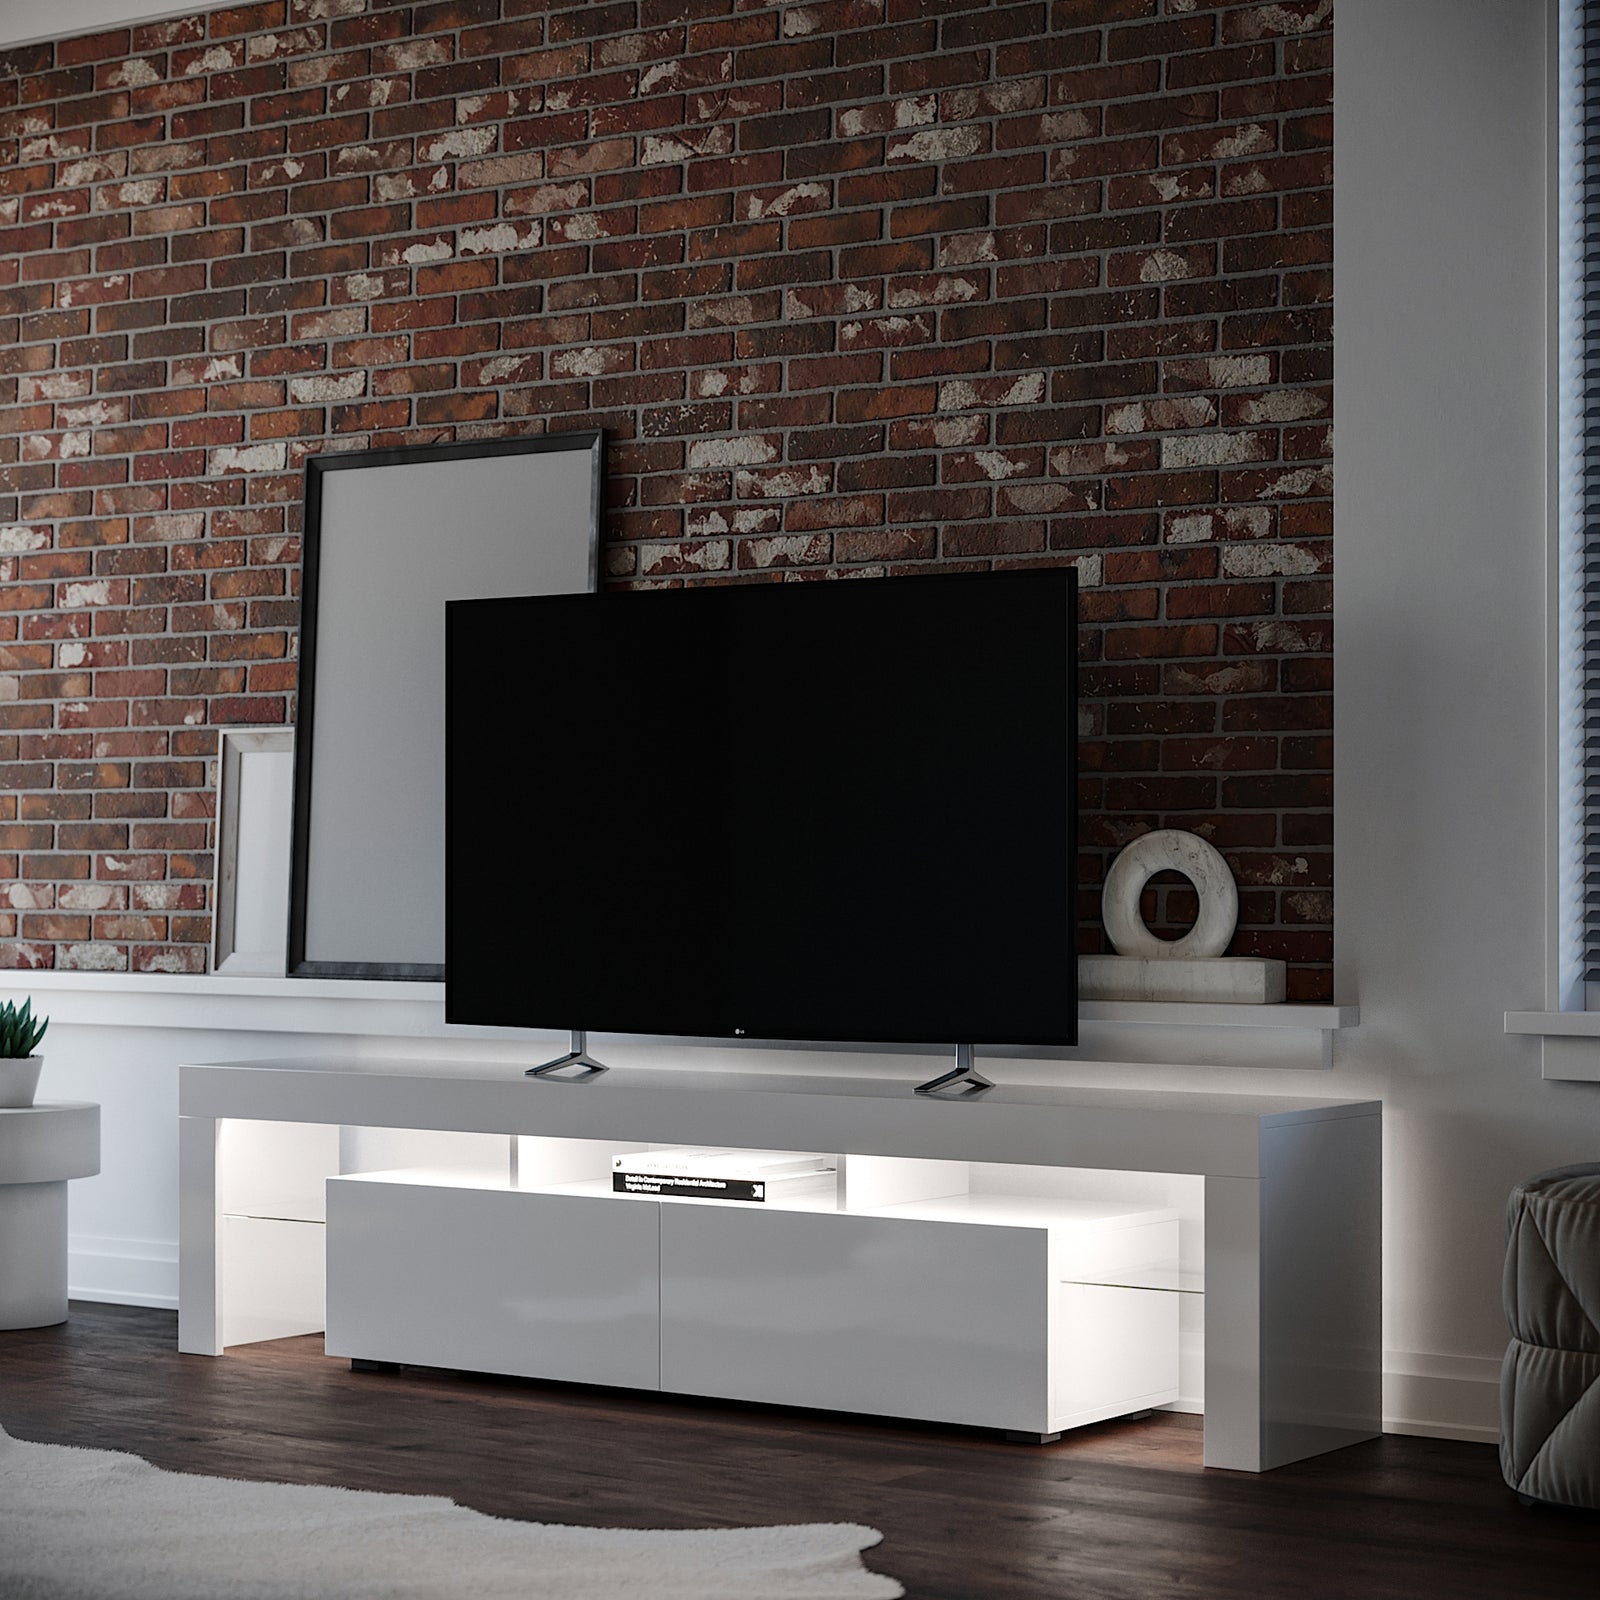 Led Lighting For Tv Stands Cabinets Entertainment Media Units